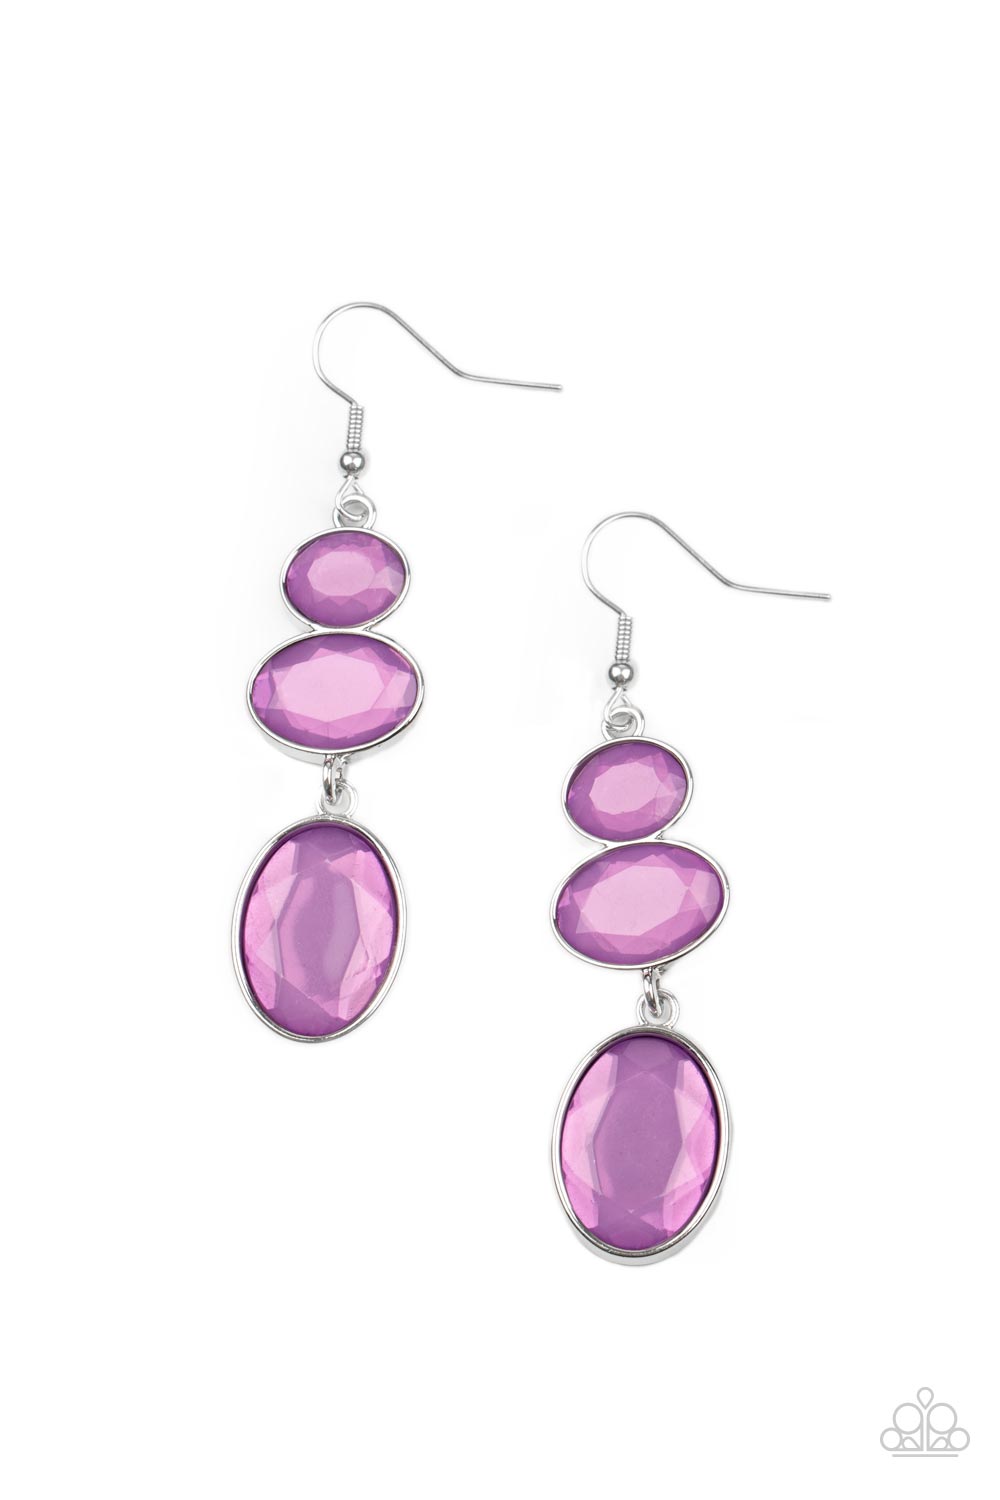 Tiers Of Tranquility - purple - Paparazzi earrings